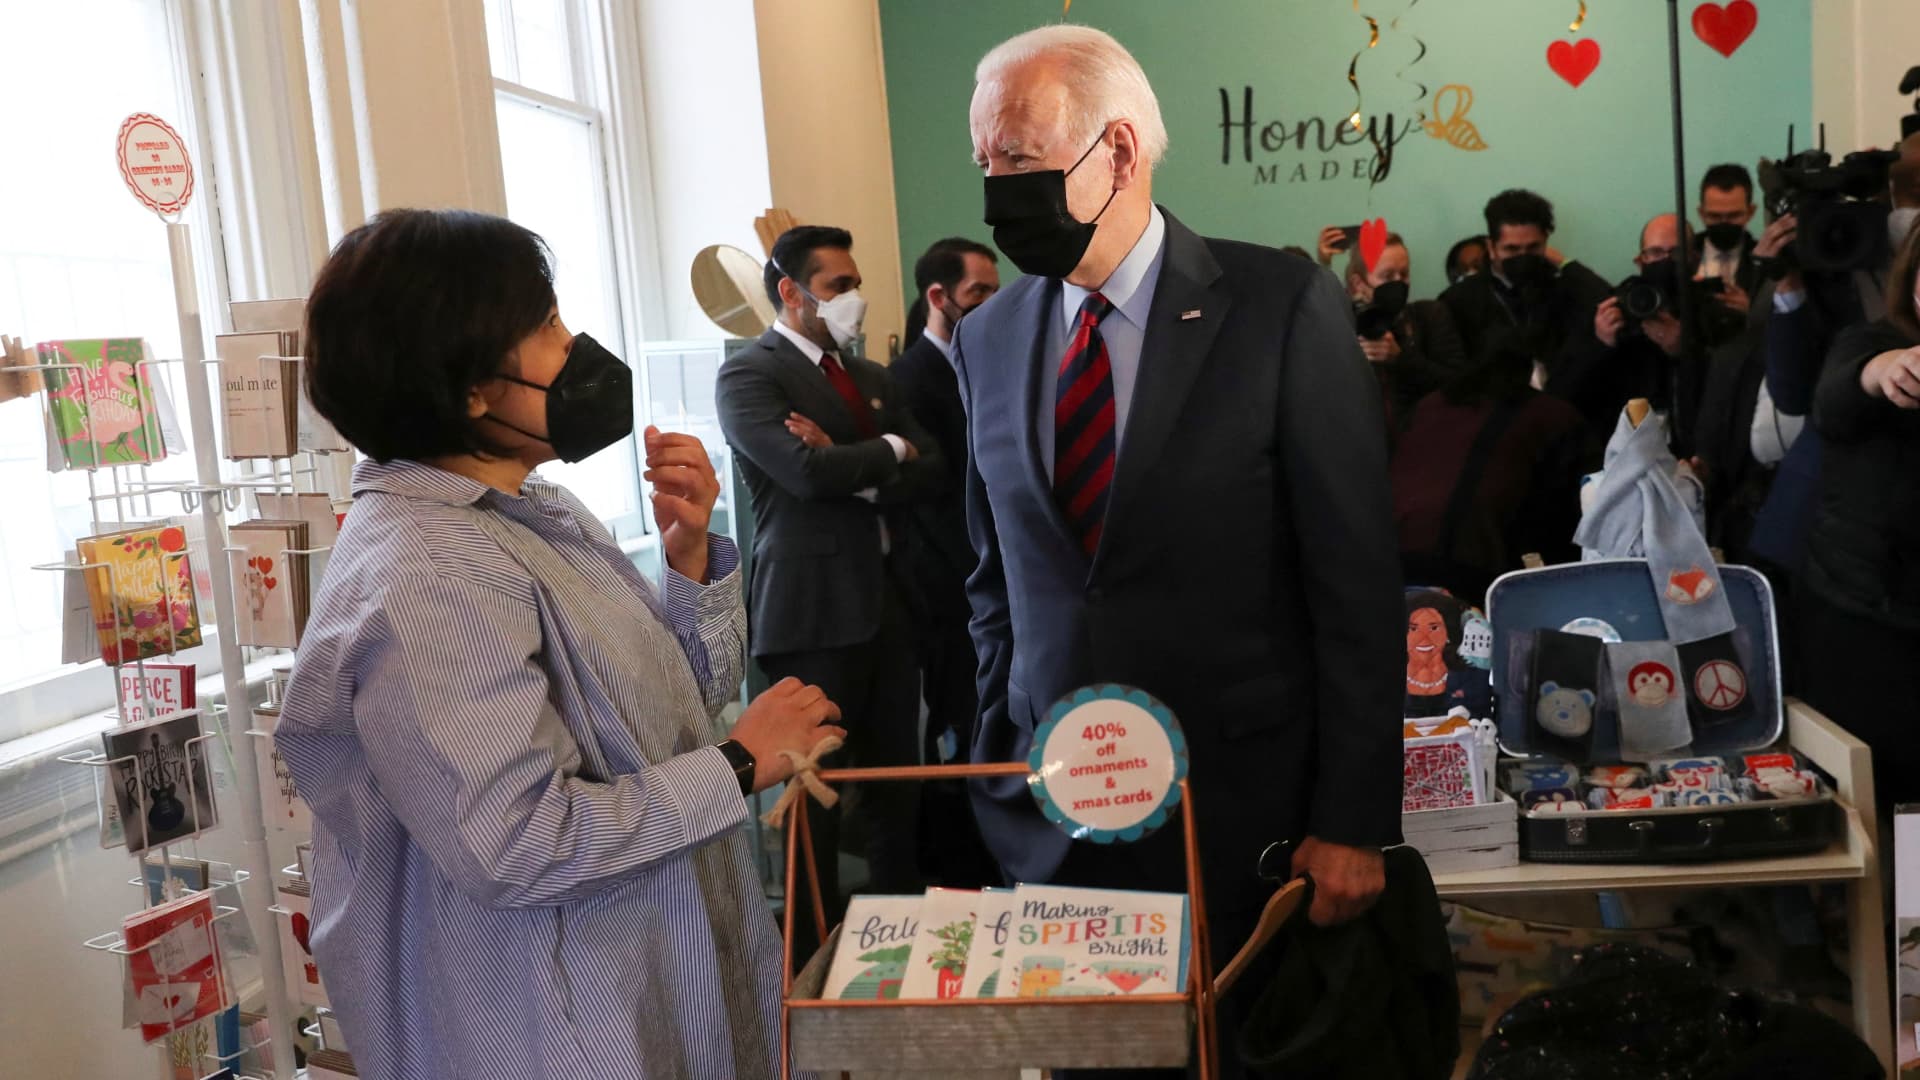 U.S. President Joe Biden talks with shop owner Viboonrattana Honey as he pays a visit to a small store called Honey Made that sells handmade clothing and gifts on Capitol Hill in Washington, U.S., January 25, 2022.